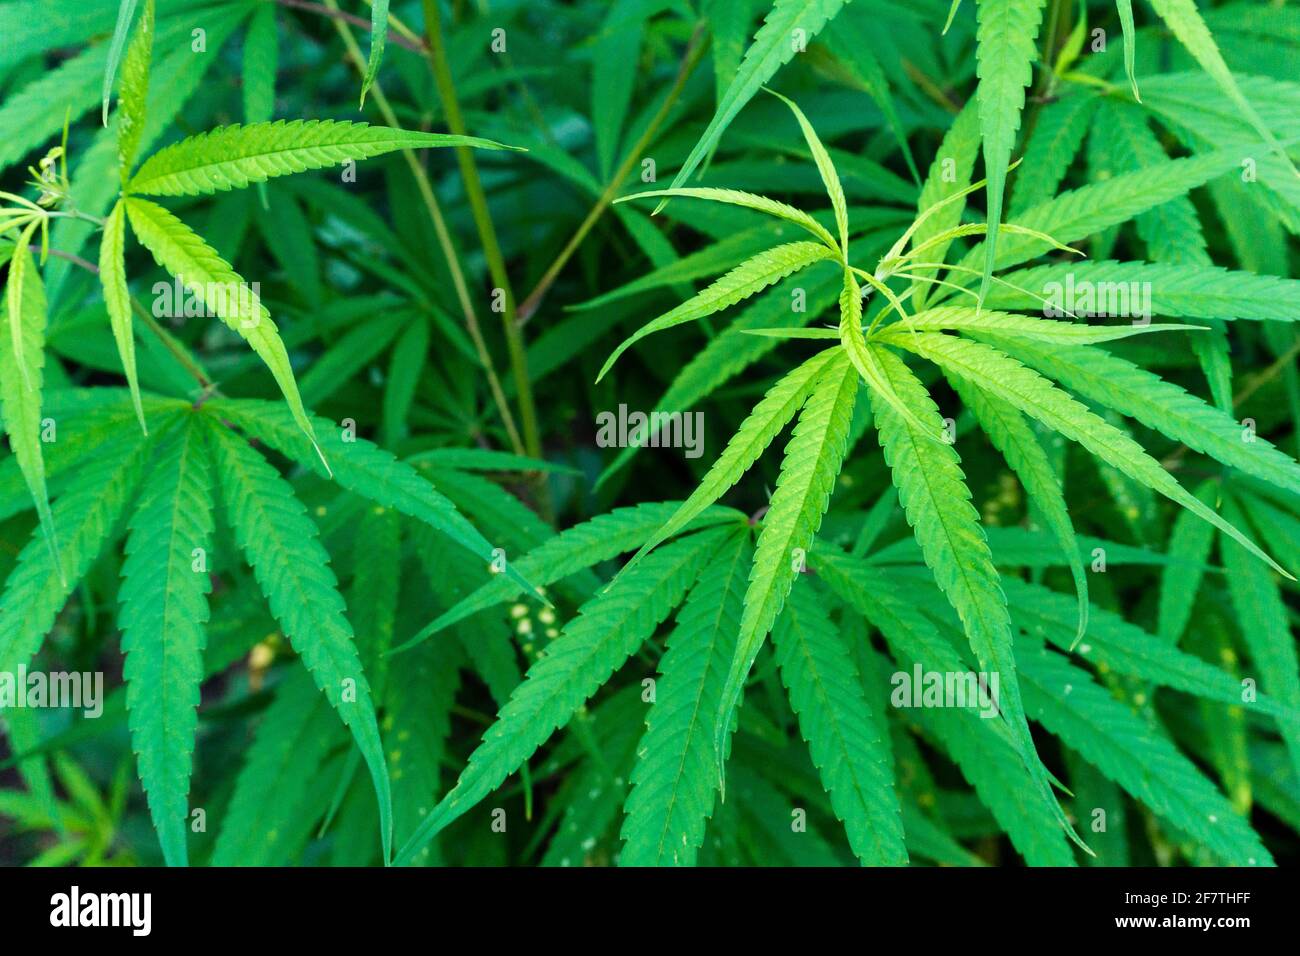 A close up shot of cannabis leaves and bud. Stock Photo